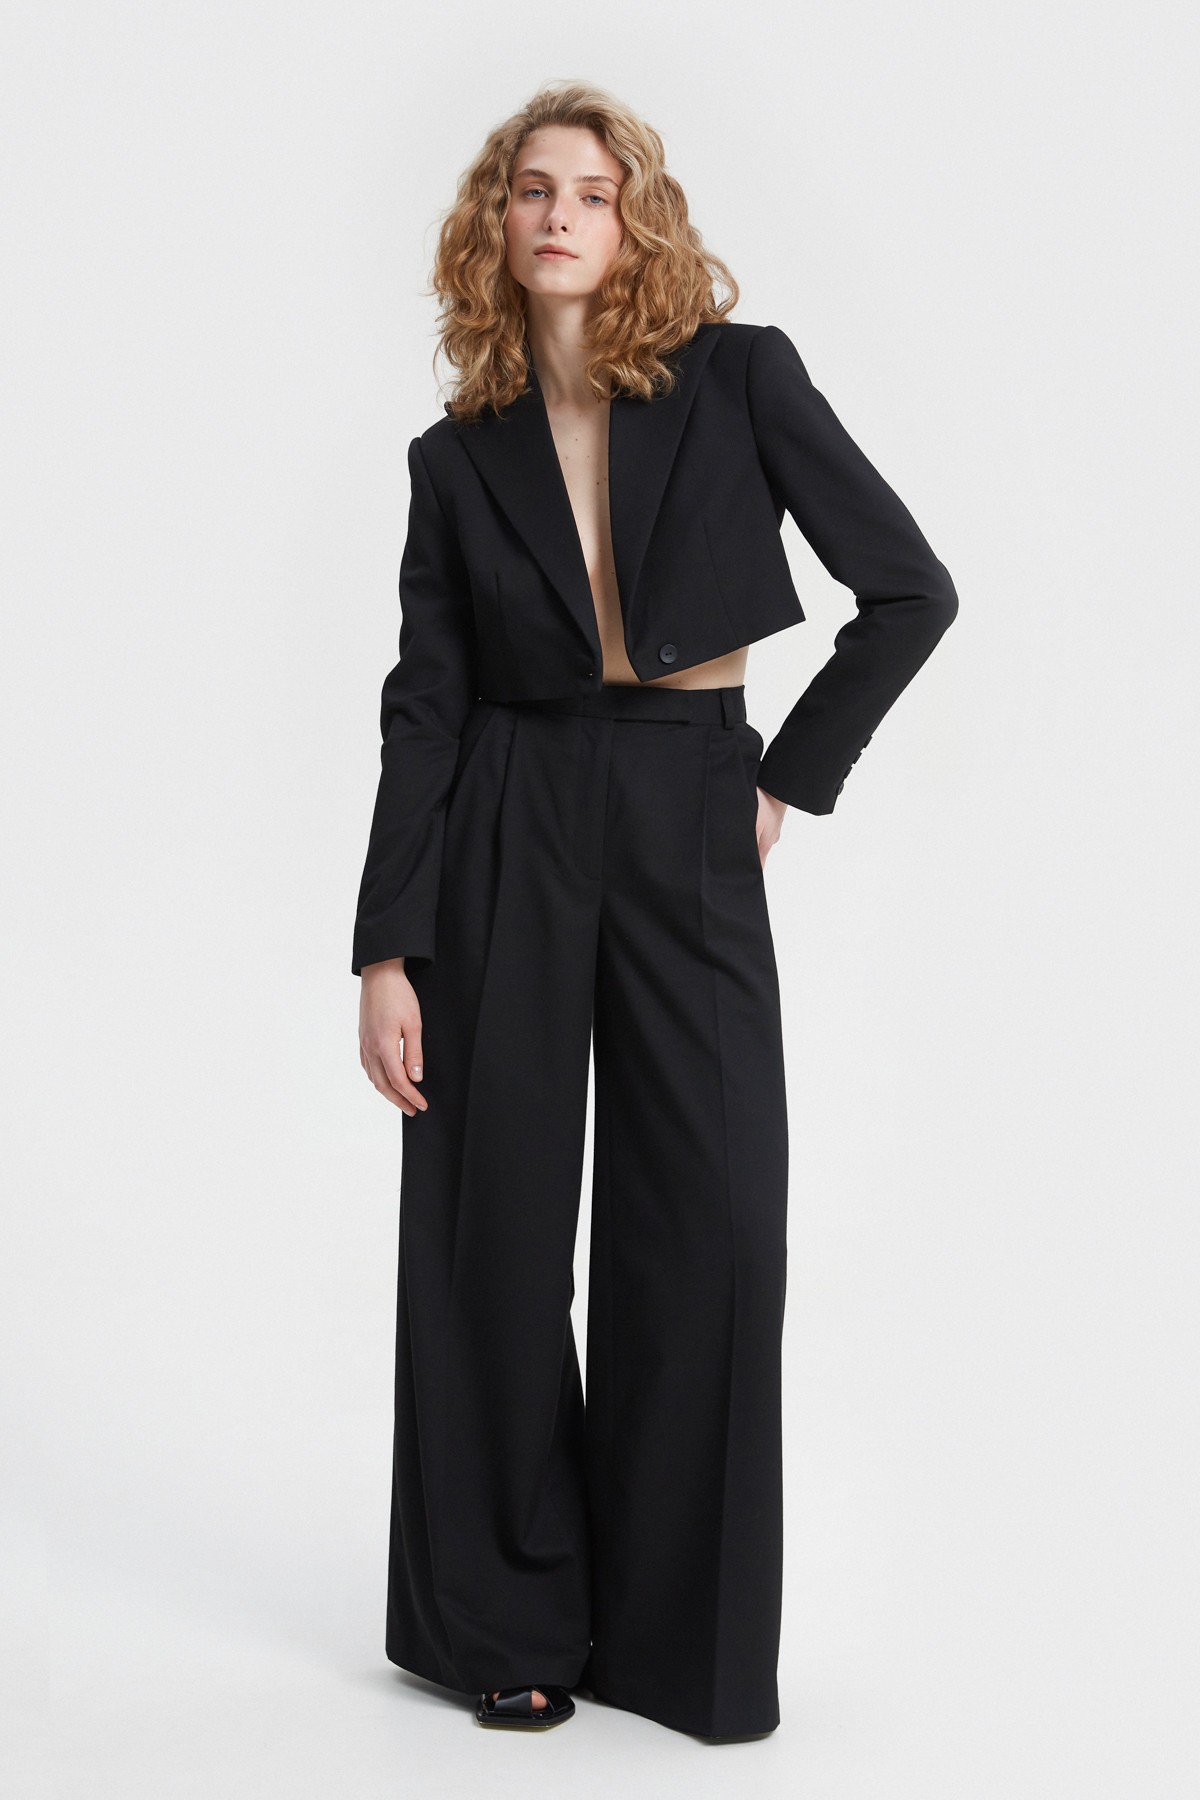 Black palazzo pants made of suit fabric with viscose